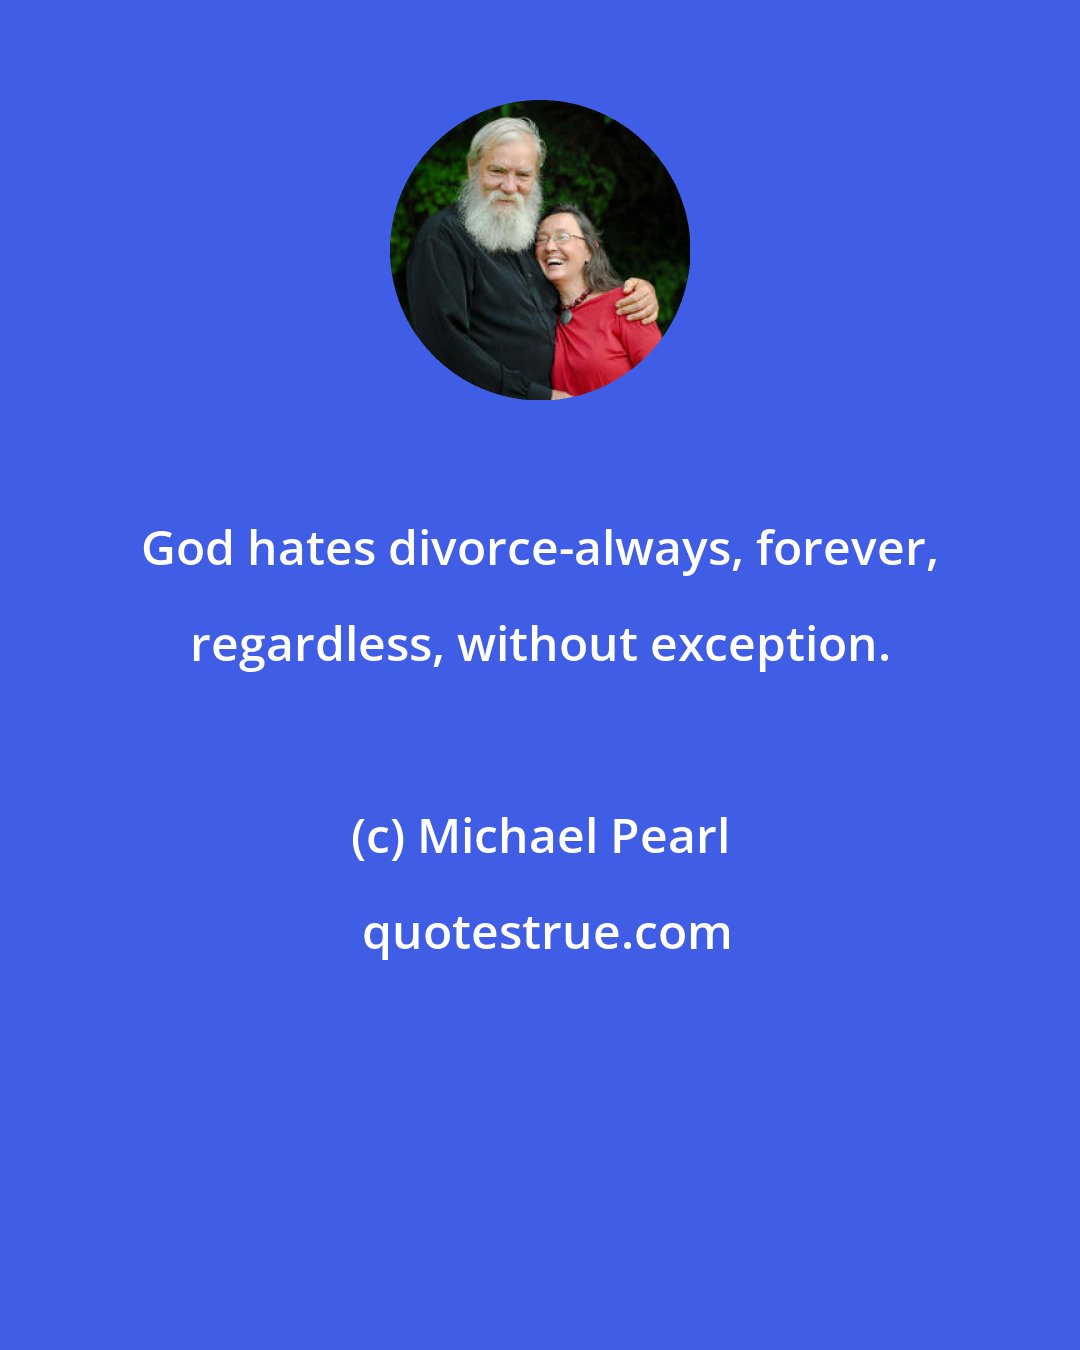 Michael Pearl: God hates divorce-always, forever, regardless, without exception.